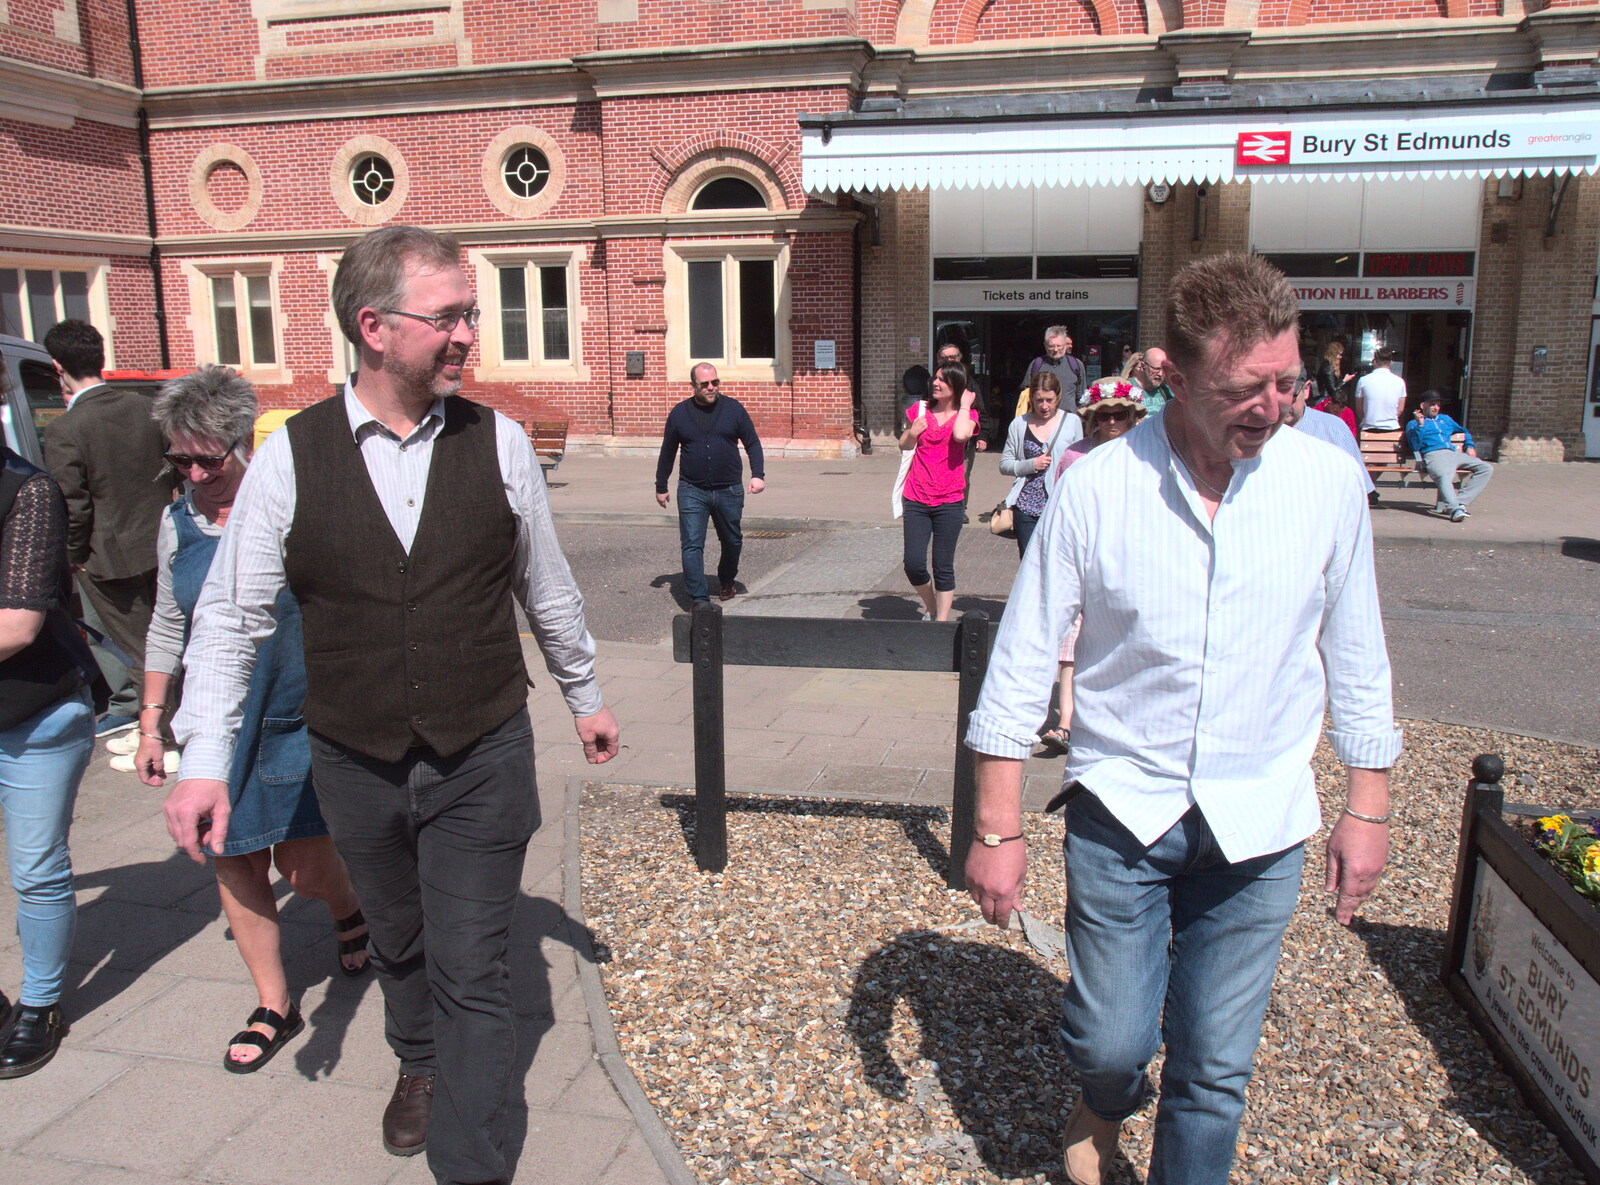 Marc and Gaz outside Bury St Edmunds station from The East Anglian Beer Festival, Bury St. Edmunds, Suffolk - 21st April 2018